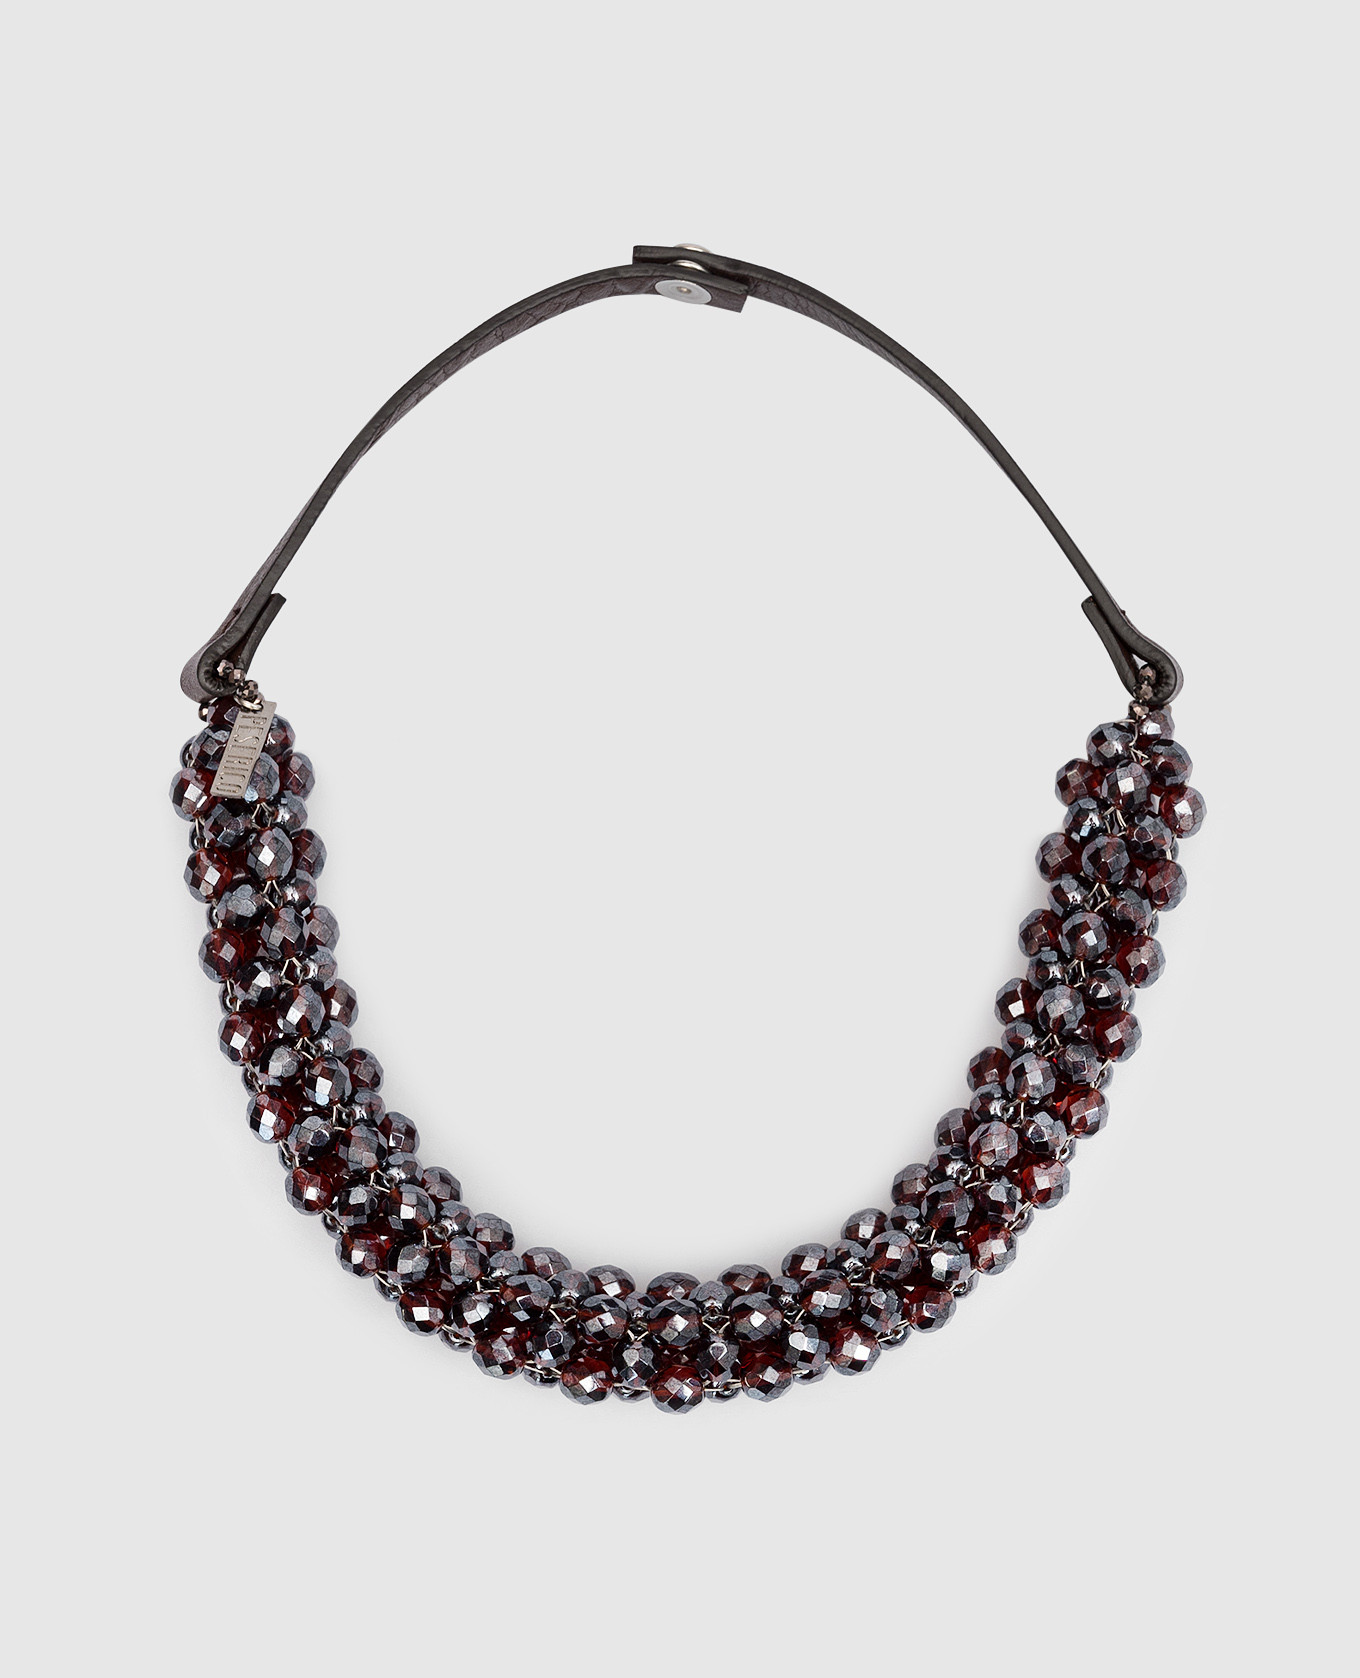 Burgundy necklace with beads